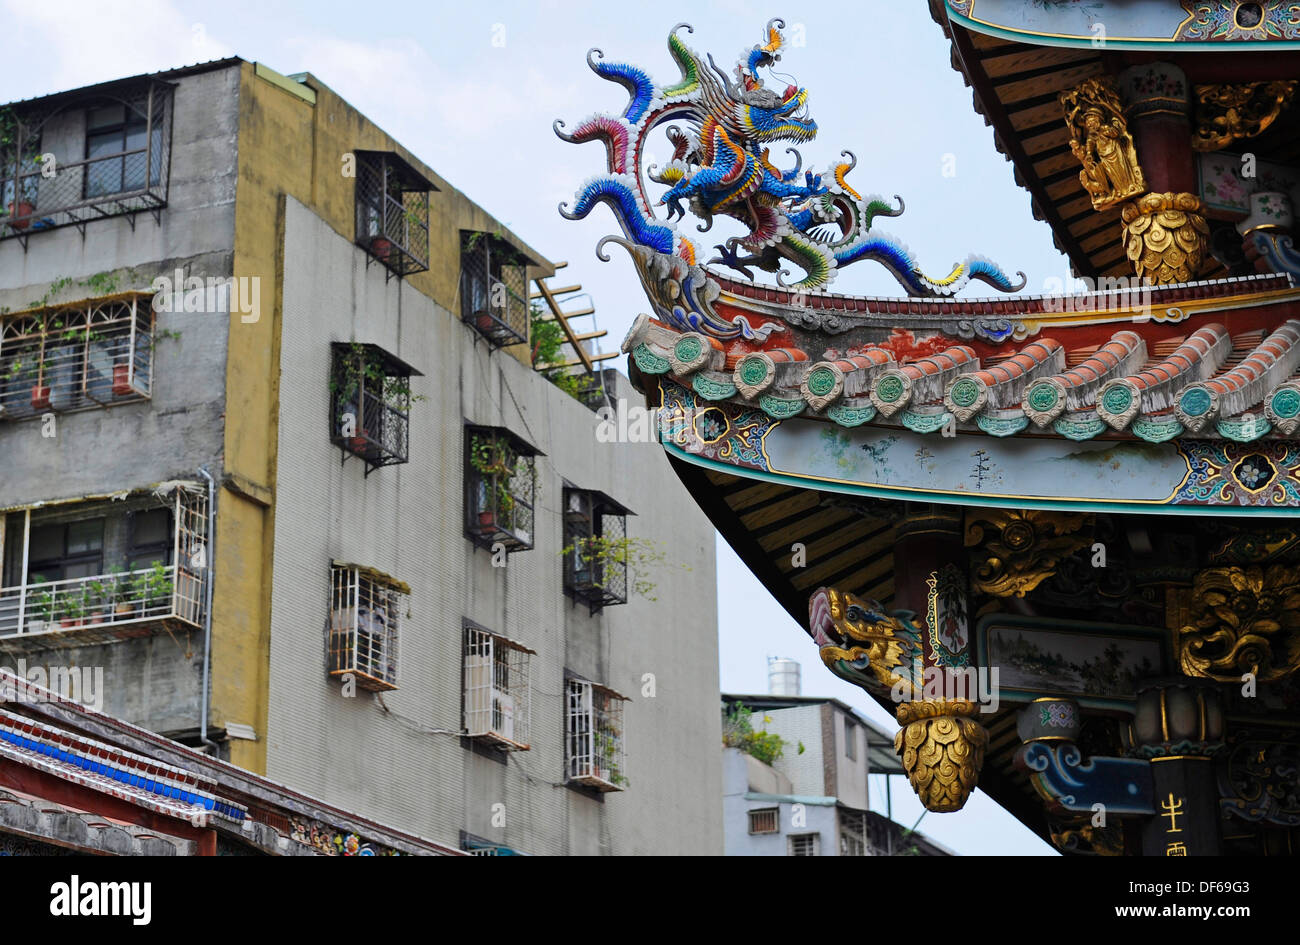 The fine decorative sculptures and Architecture of the Baoan temple juxtaposition along side the bland flats made from concrete. Stock Photo